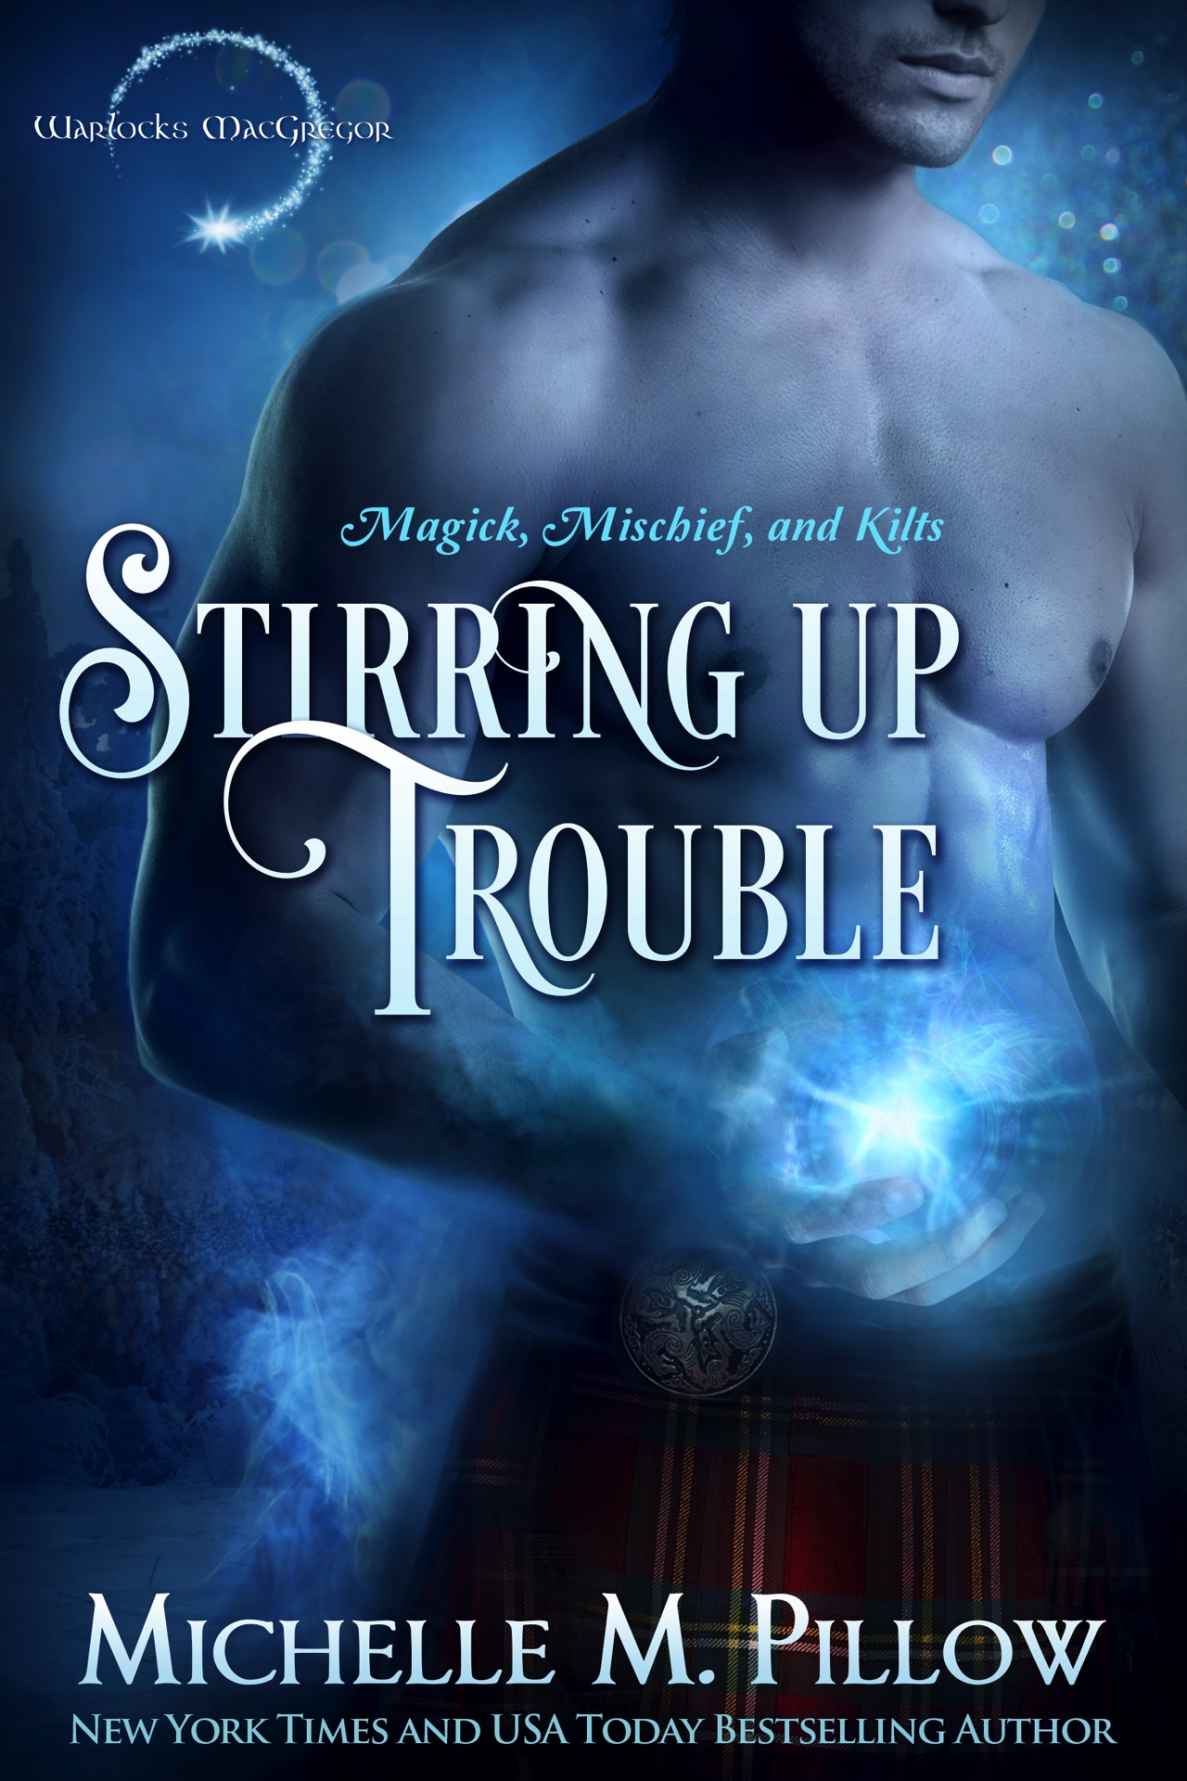 Stirring Up Trouble: A Warlocks MacGregor Novella by Michelle M. Pillow